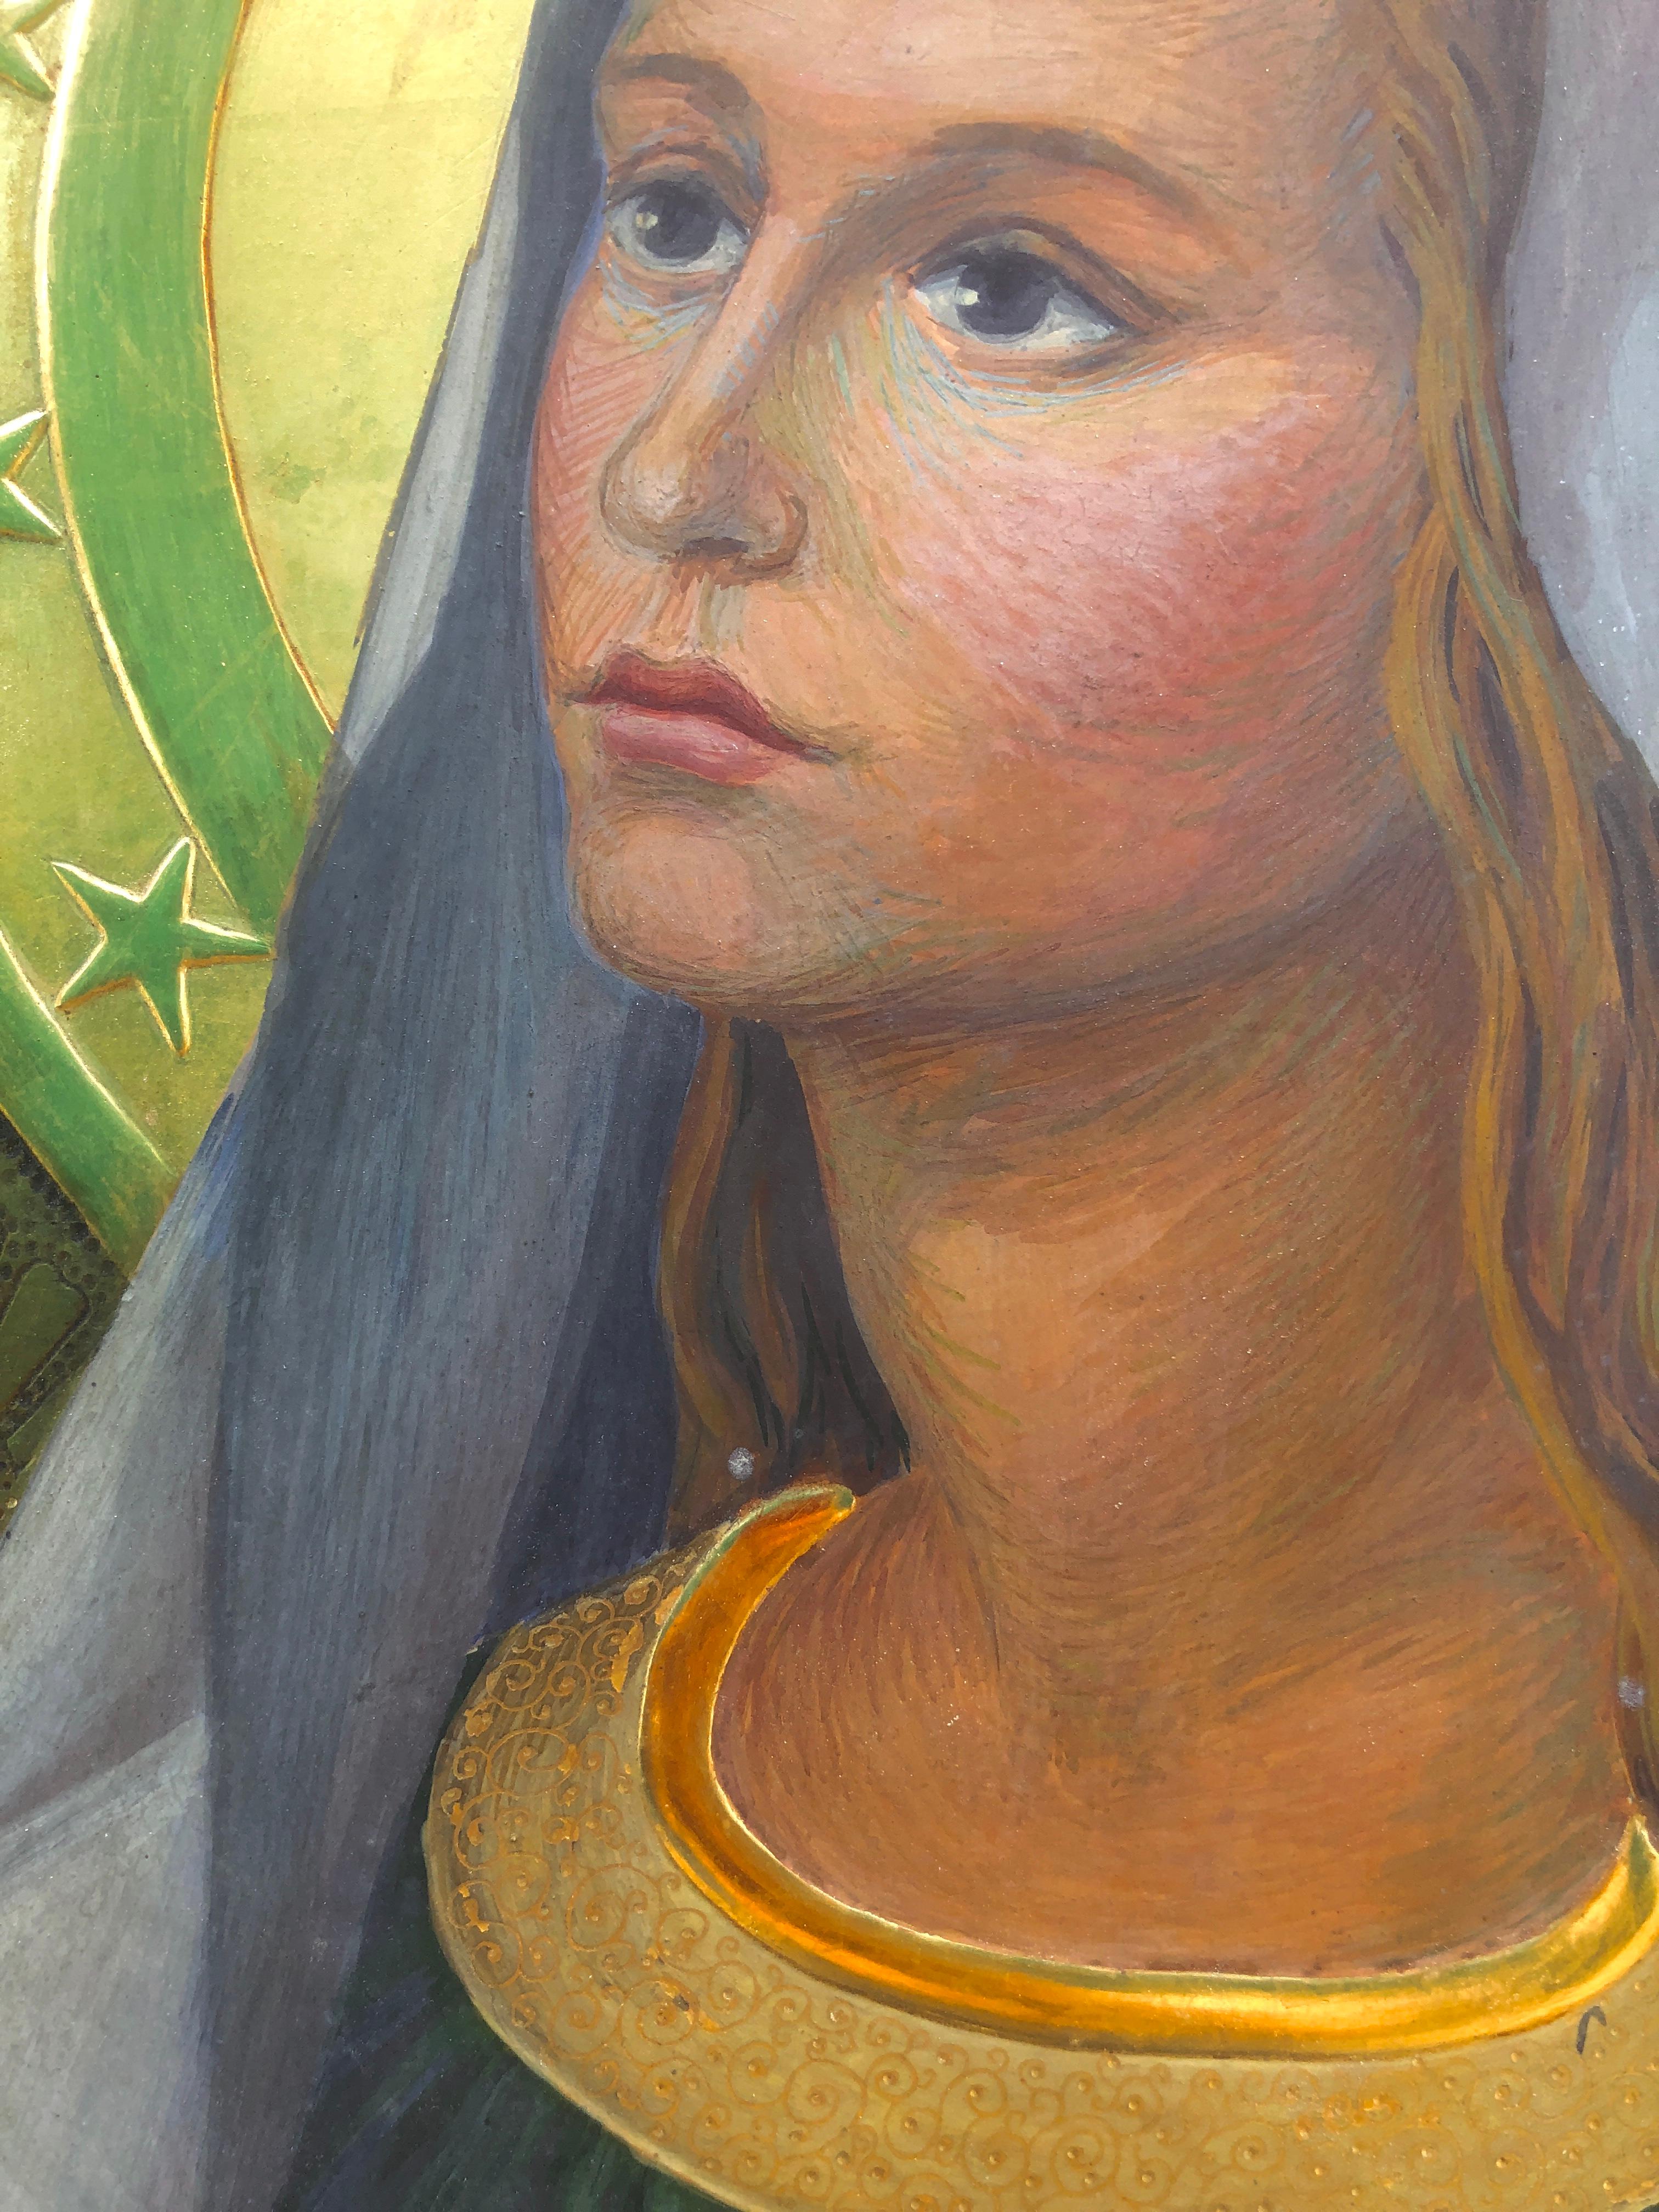 Jordi Vila i Rufas (1924-2011) - Virgin Mary 1948 - Egg tempera
Painted on gold metallic surface.
Painting measurements 40x32 cm.
Frame measurements 53x45 cm.
Inactive xylophagous galleries on frame and support.

Jordi Vila i Rufas (Barcelona,